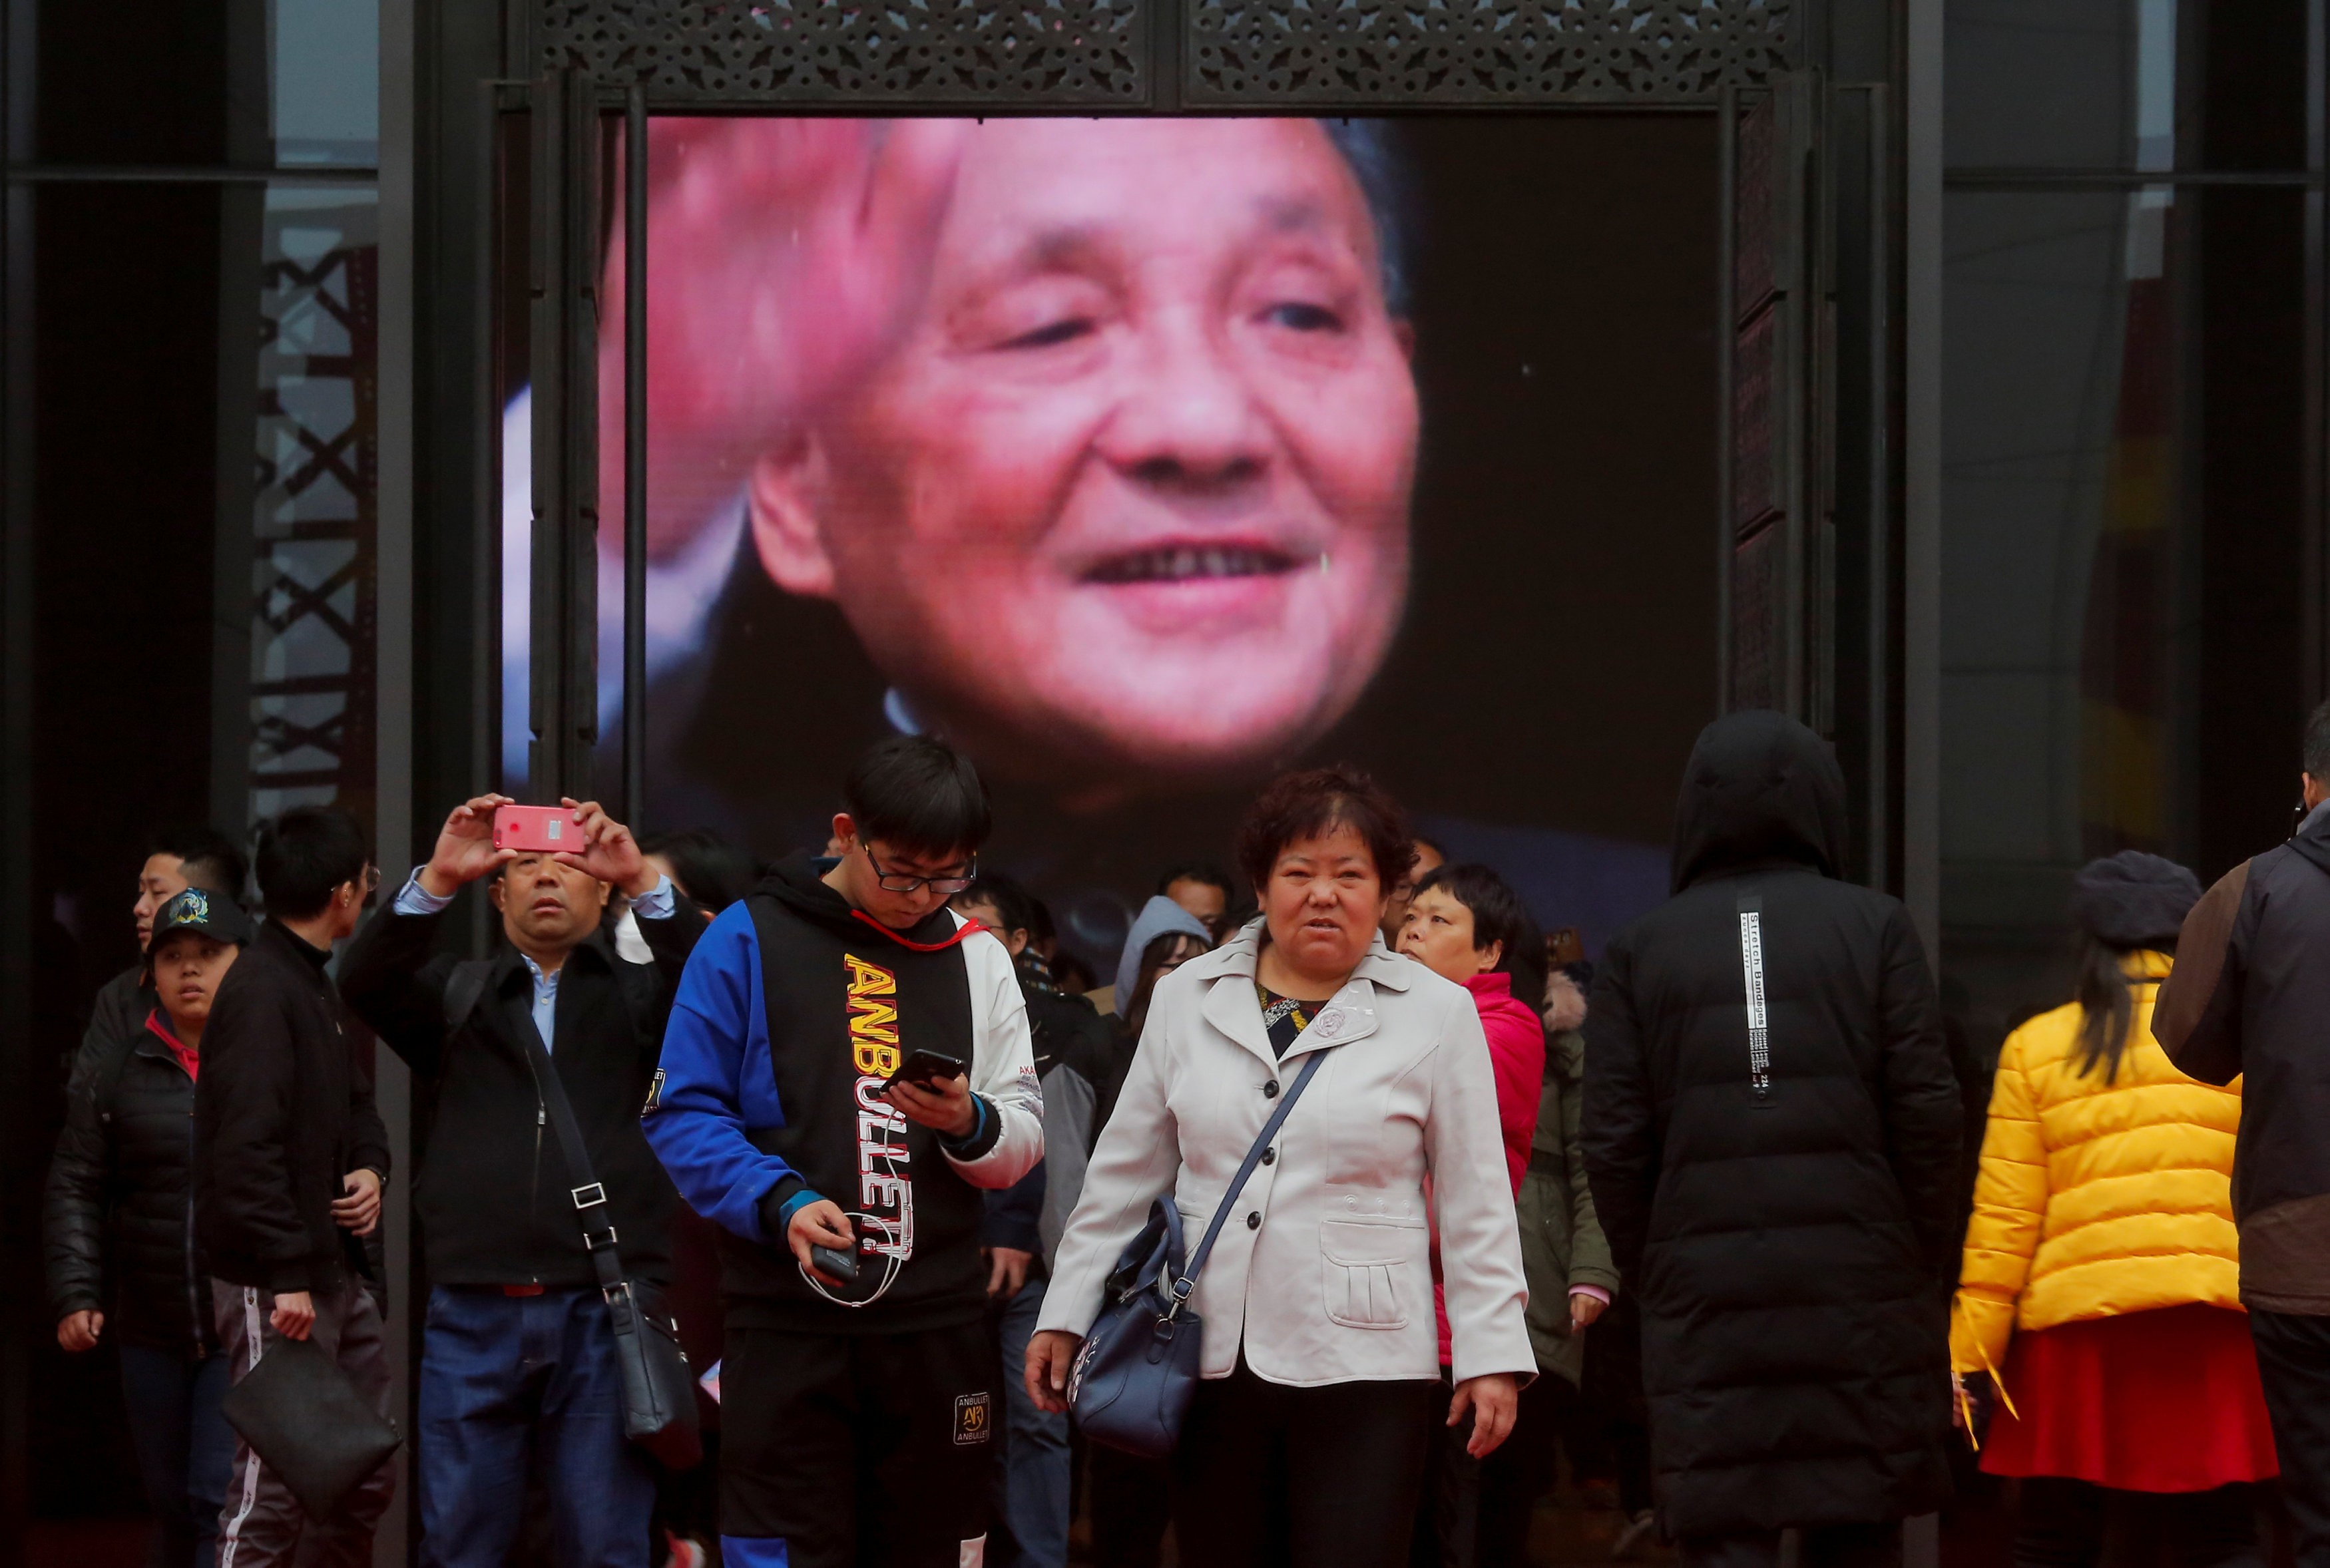 Visitors stand in front of a screen showing former Chinese leader Deng Xiaoping at an exhibition marking the 40th anniversary of China's reform and opening up at the National Museum of China in Beijing, China. Photo: Reuters/Thomas Peter